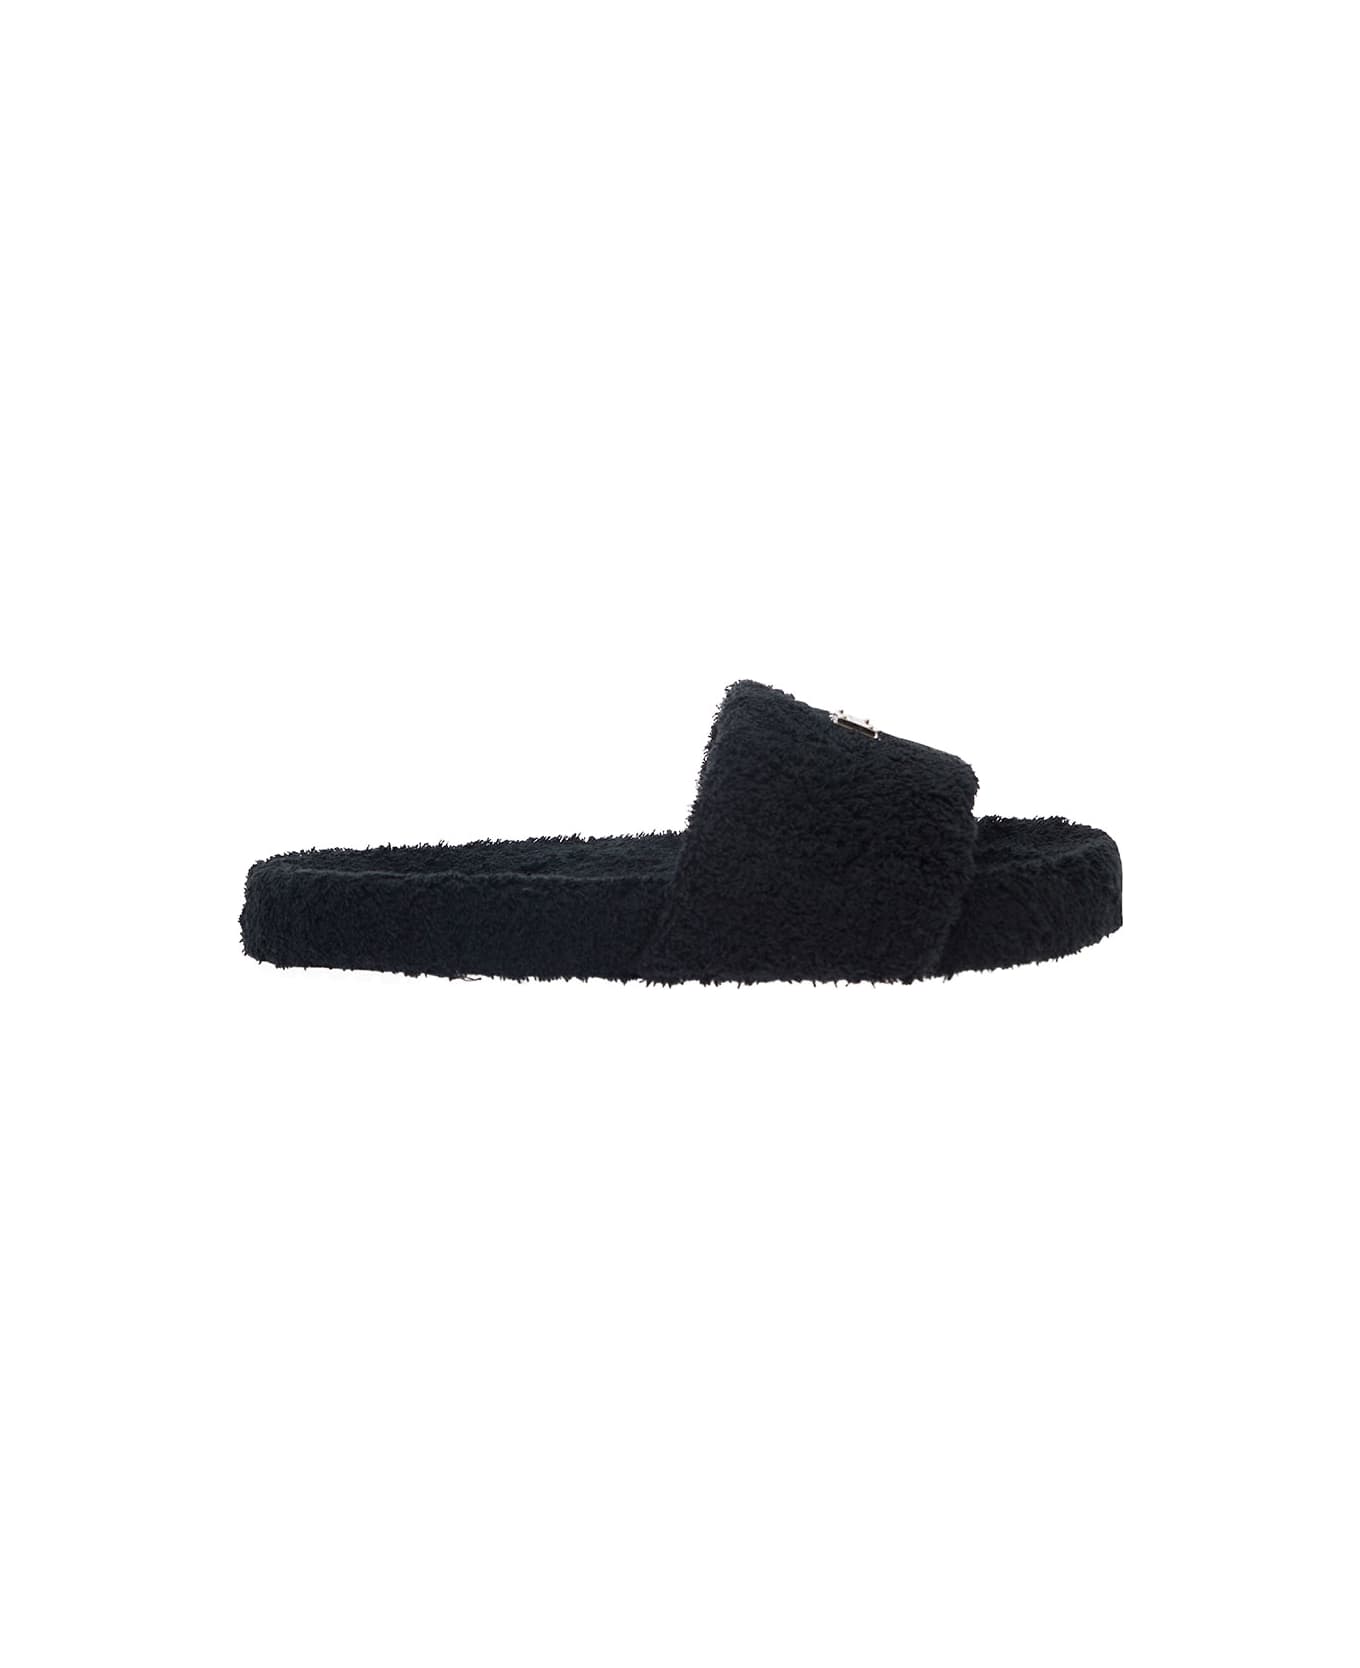 Dolce & Gabbana Black Slide Sandal With Logo Plaque In Terrycloth Man - Black その他各種シューズ